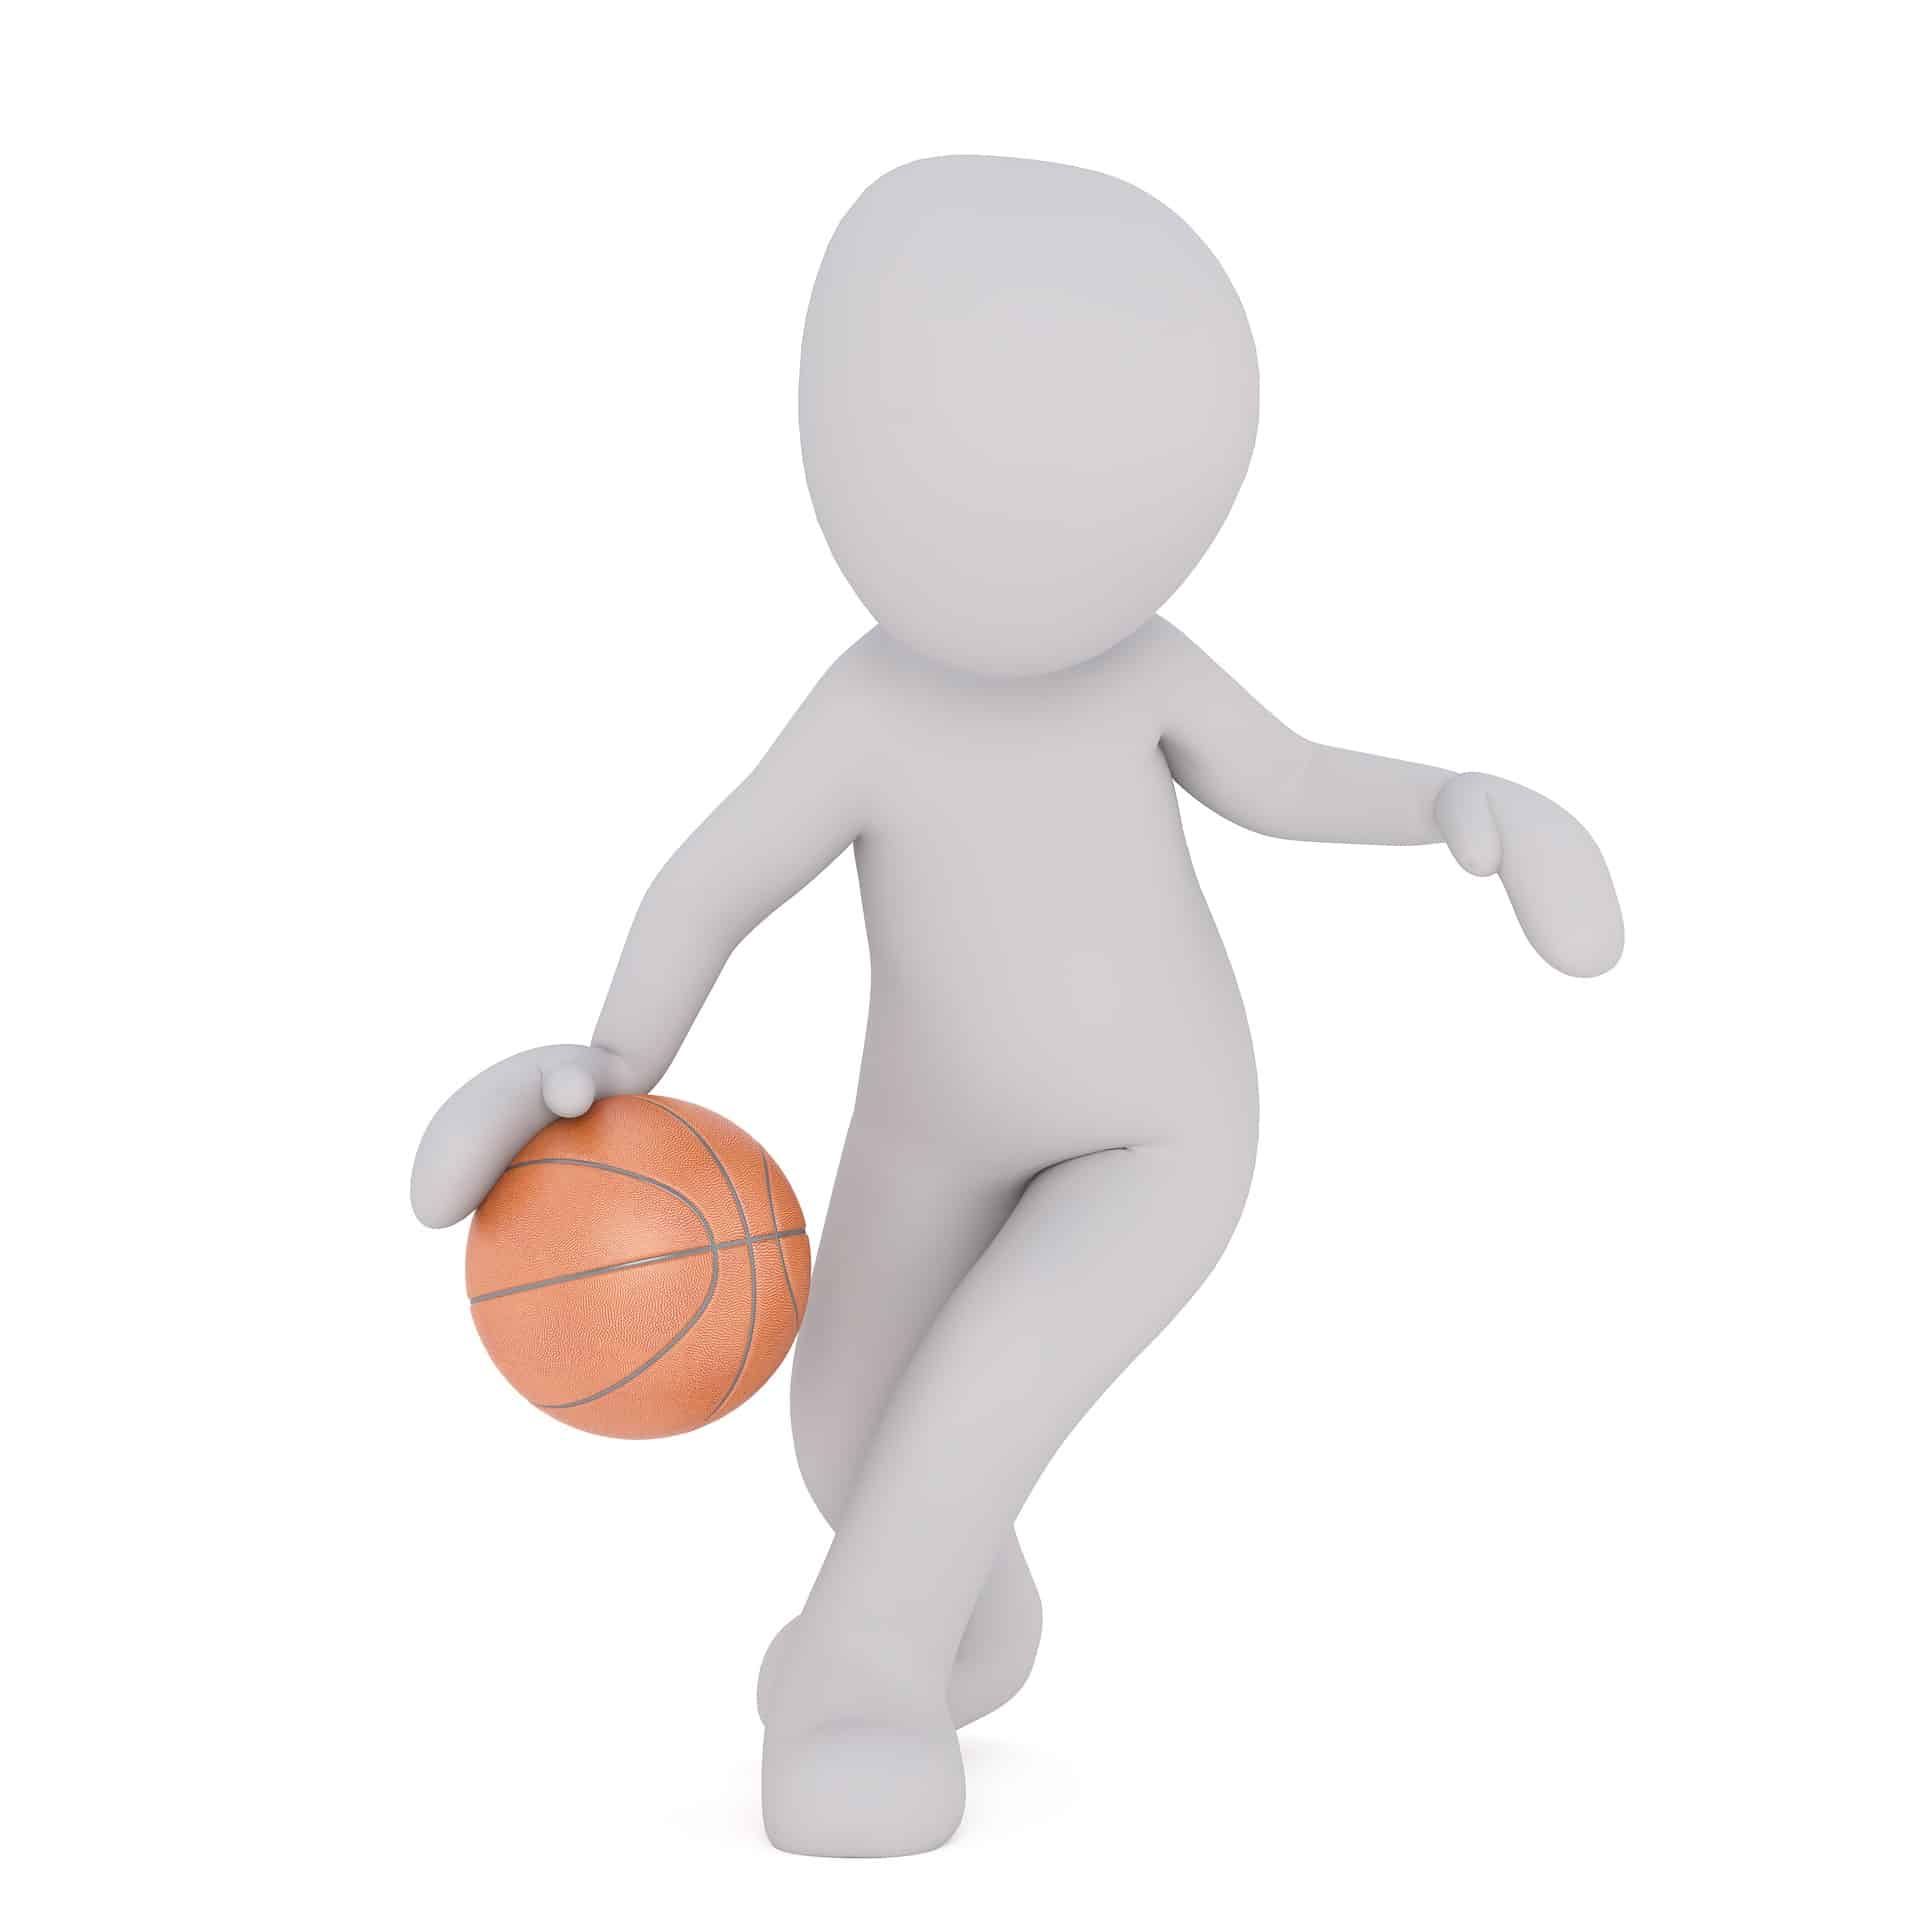 yoga for osteoporosis - which exercise is better basketball